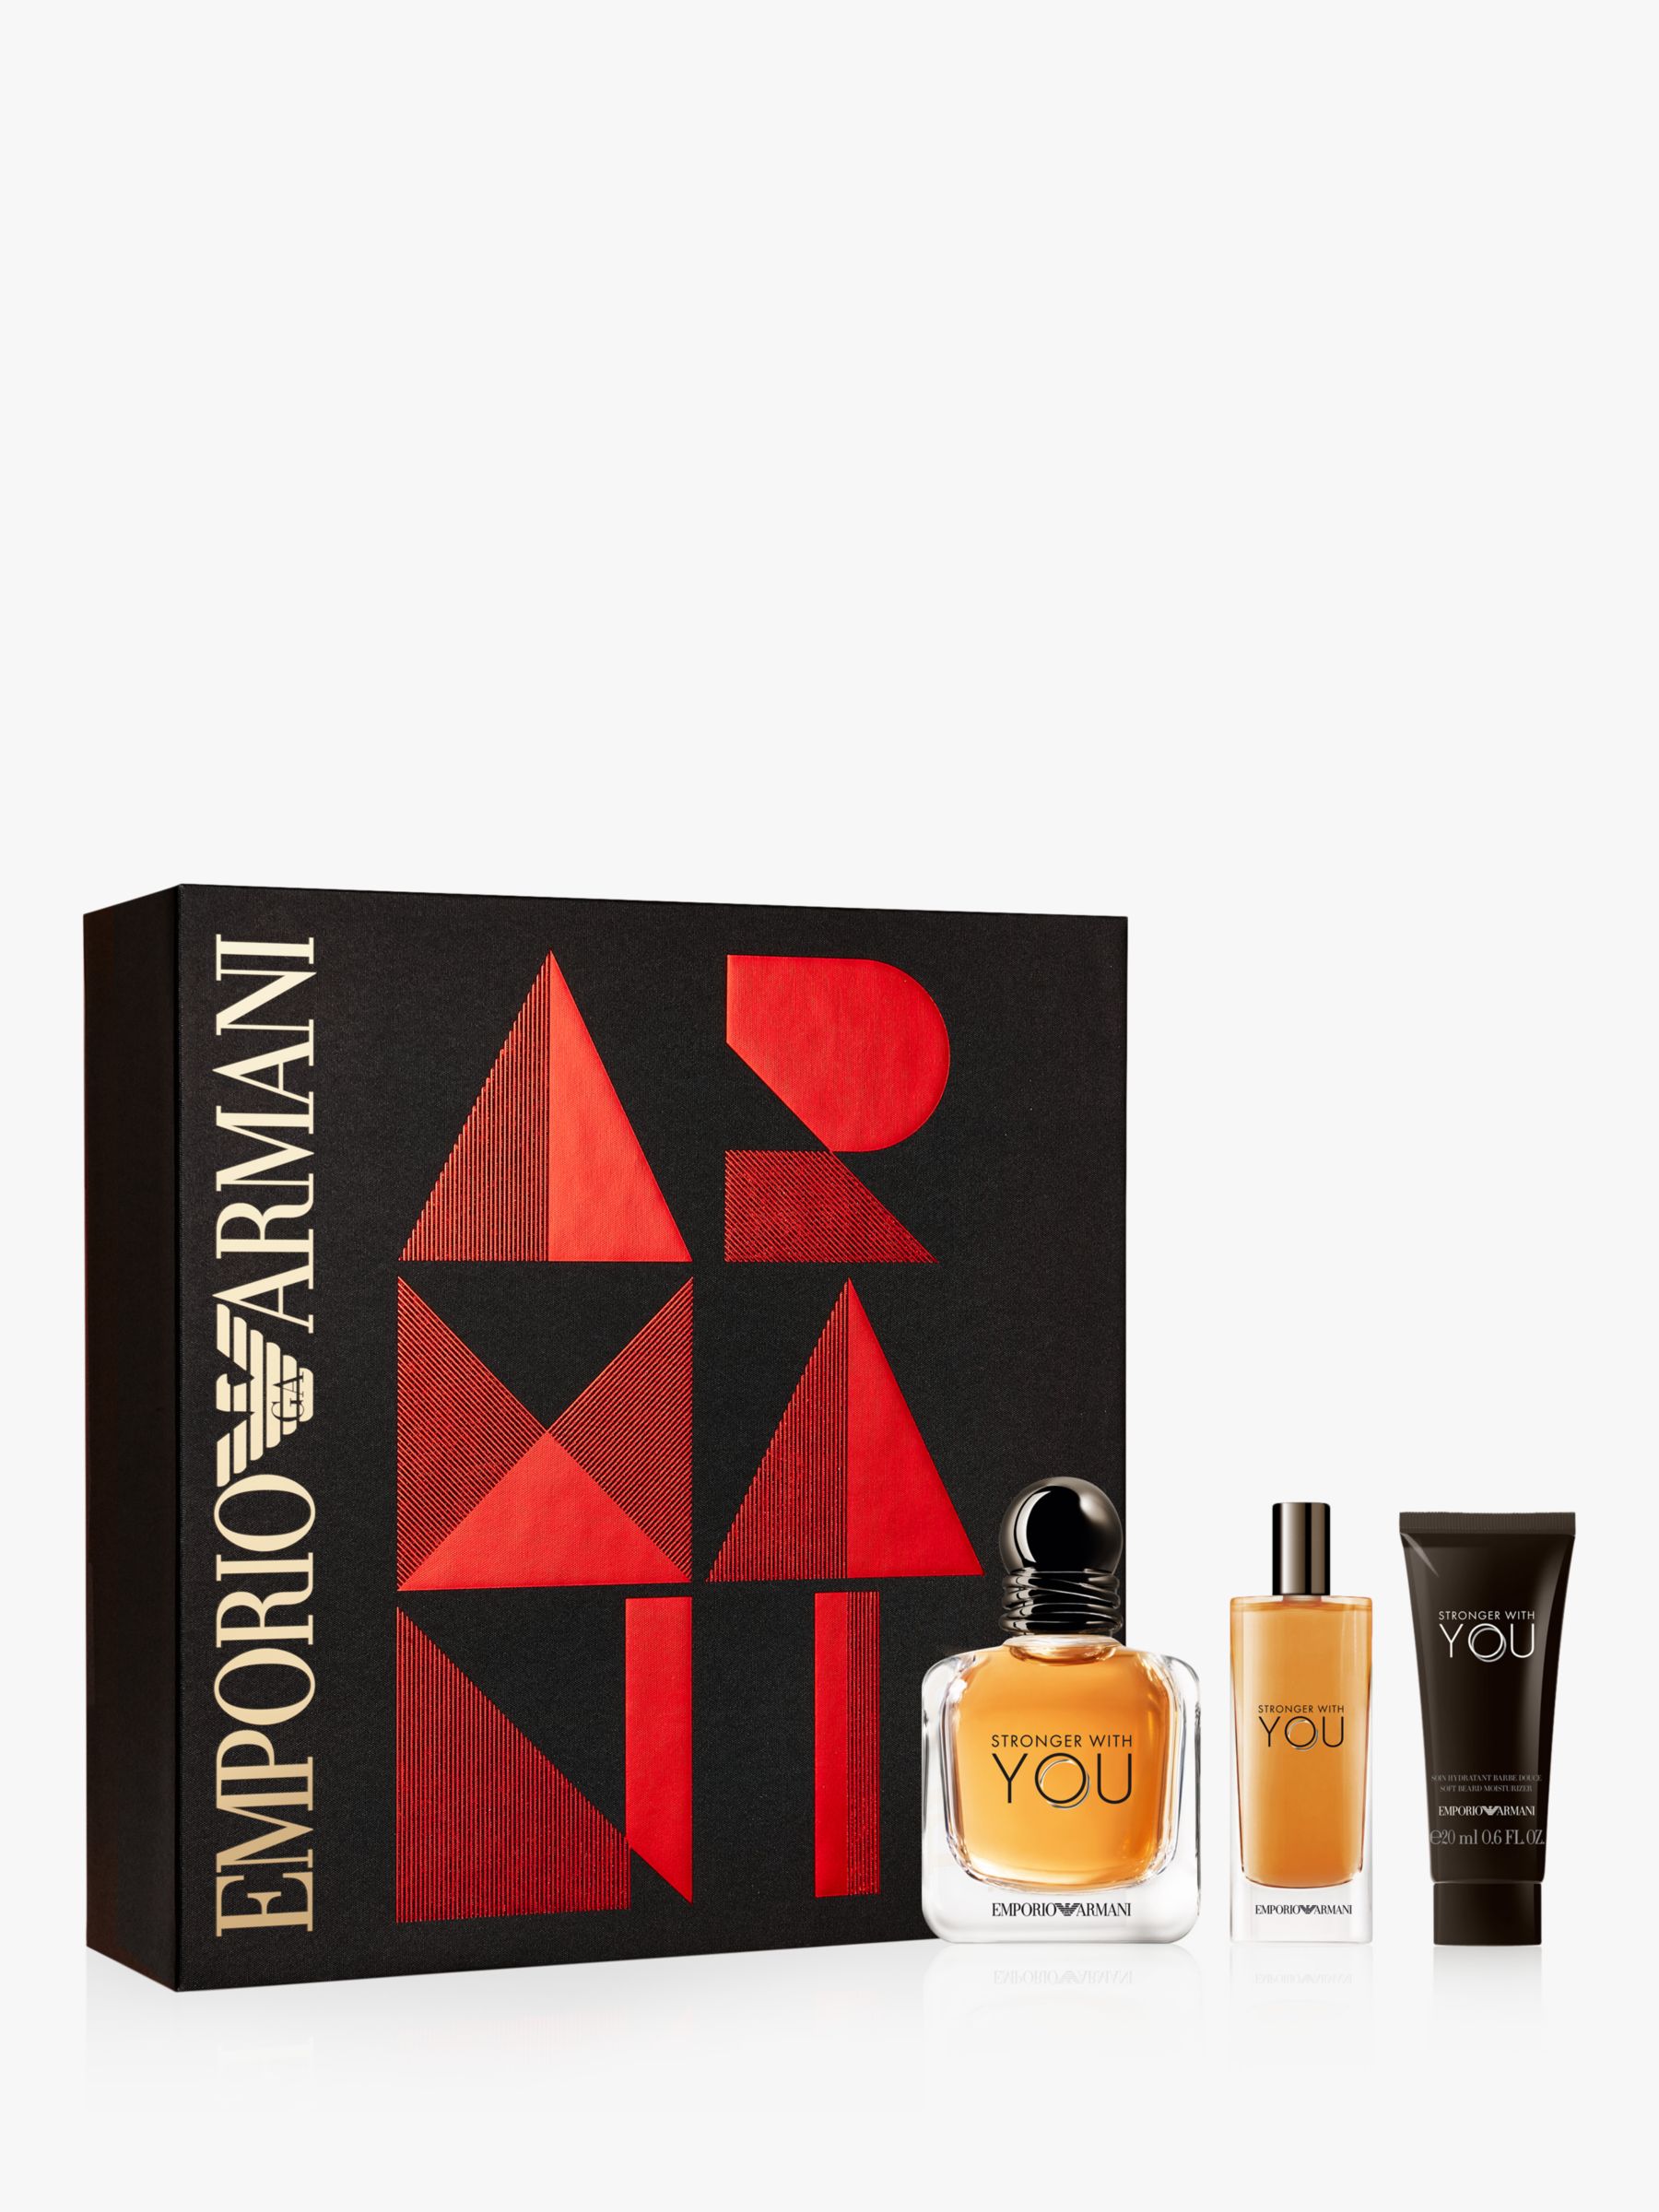 stronger by you armani